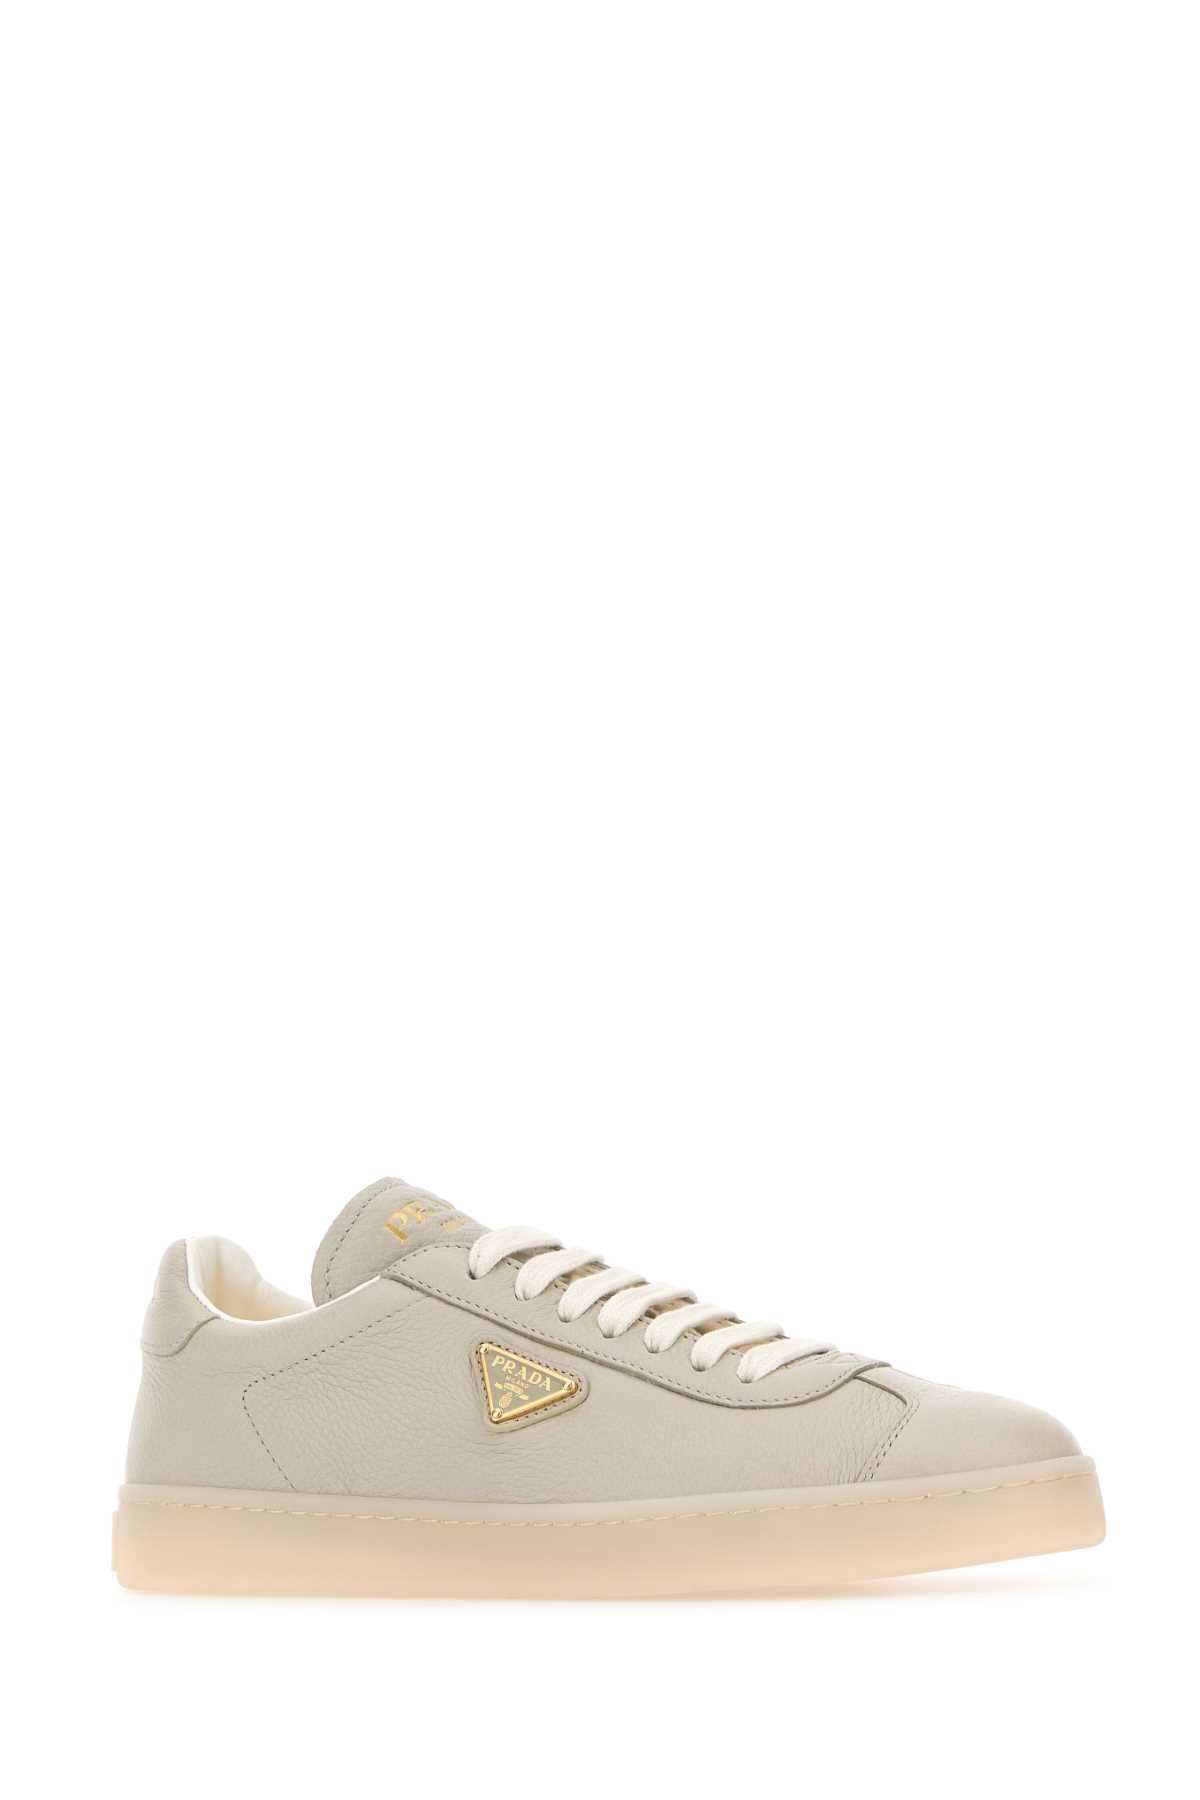 Prada Sand Leather Downtown Trainers In Pomice